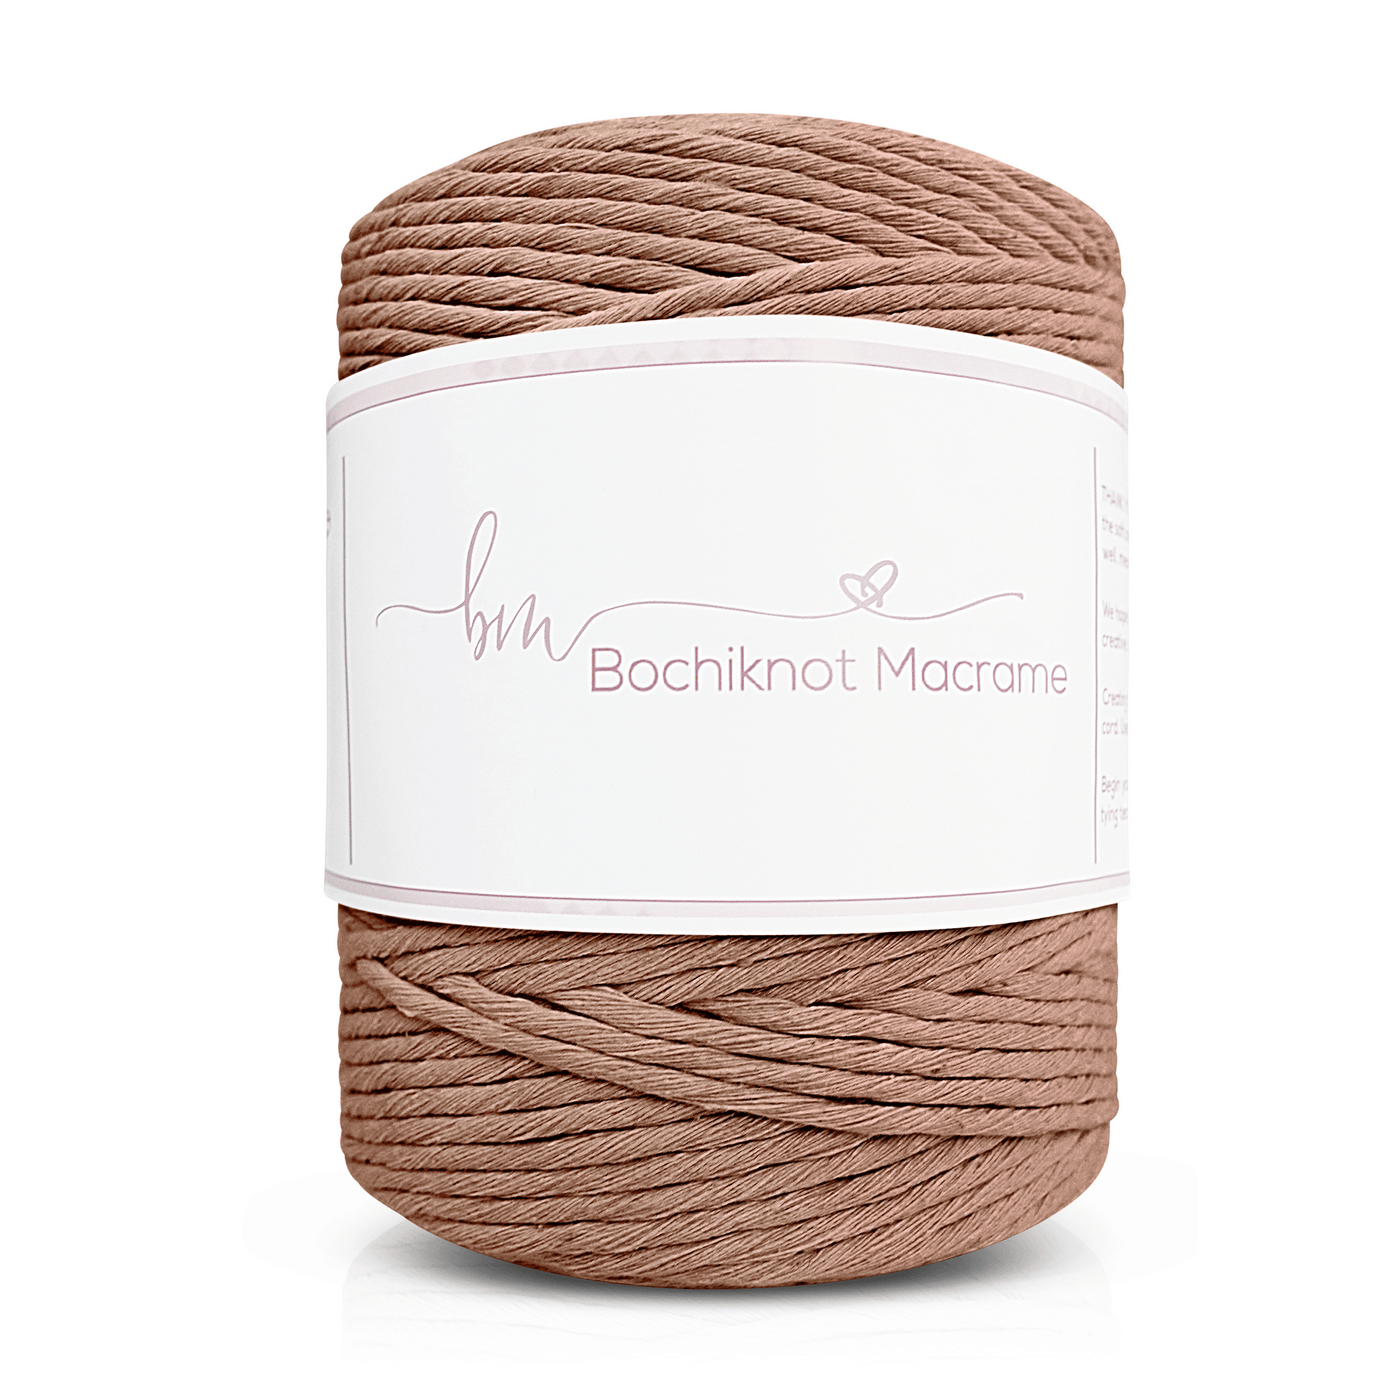 Clearance Recycled 3mm Single Stand Cotton Cord (Dusty Mauve)